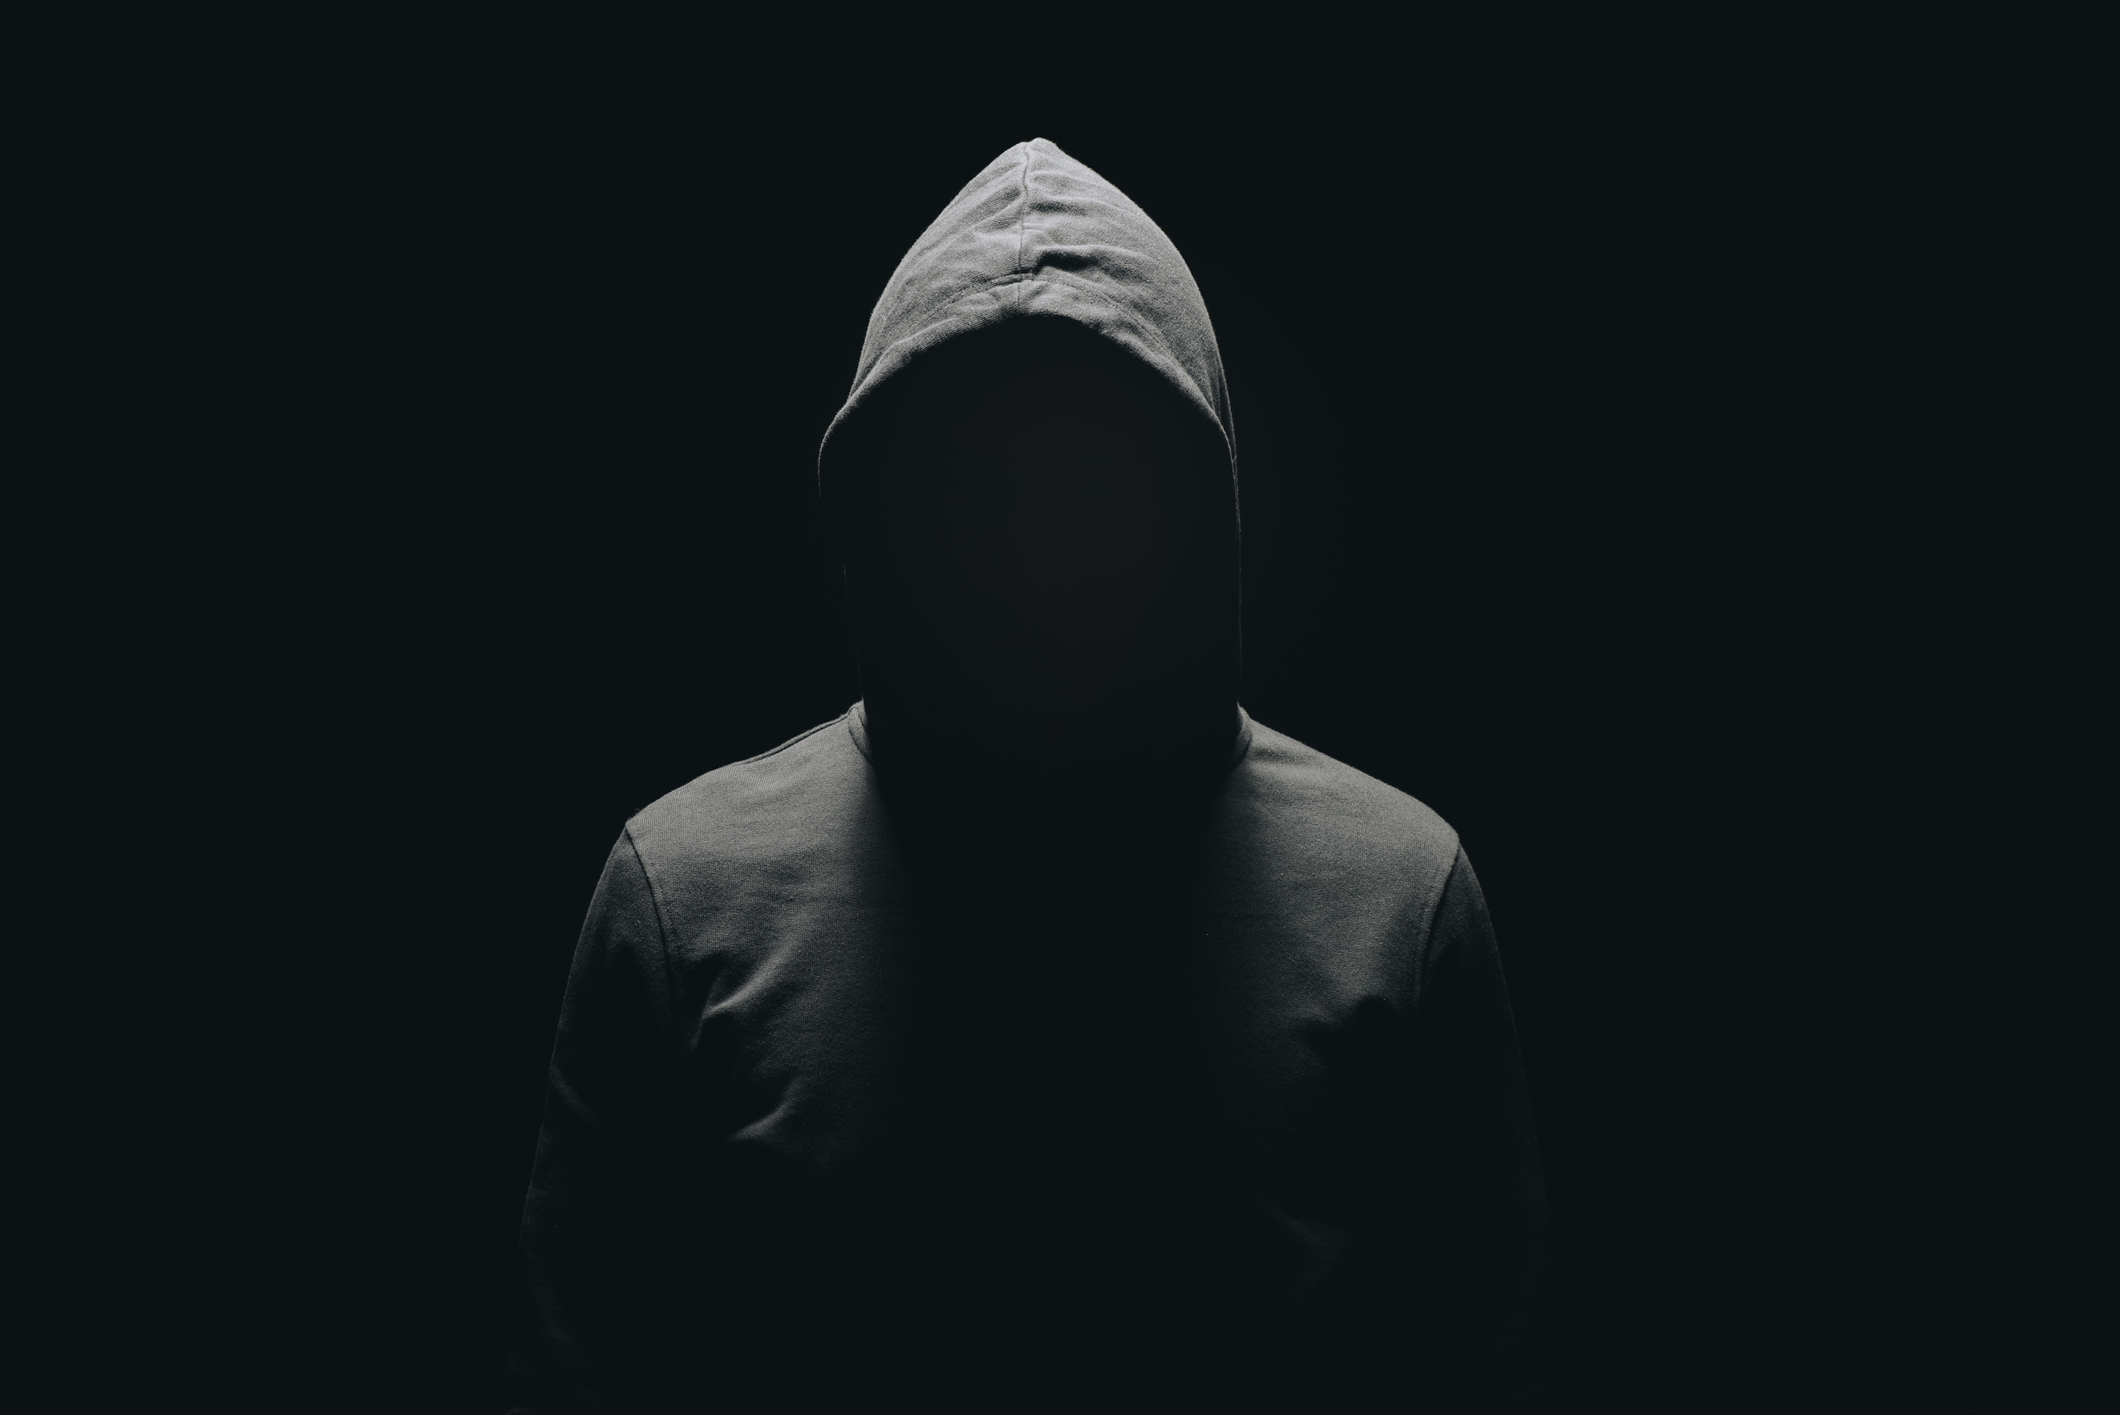 Silhouette of an unidentified person in a hooded top against a dark background, posing anonymously